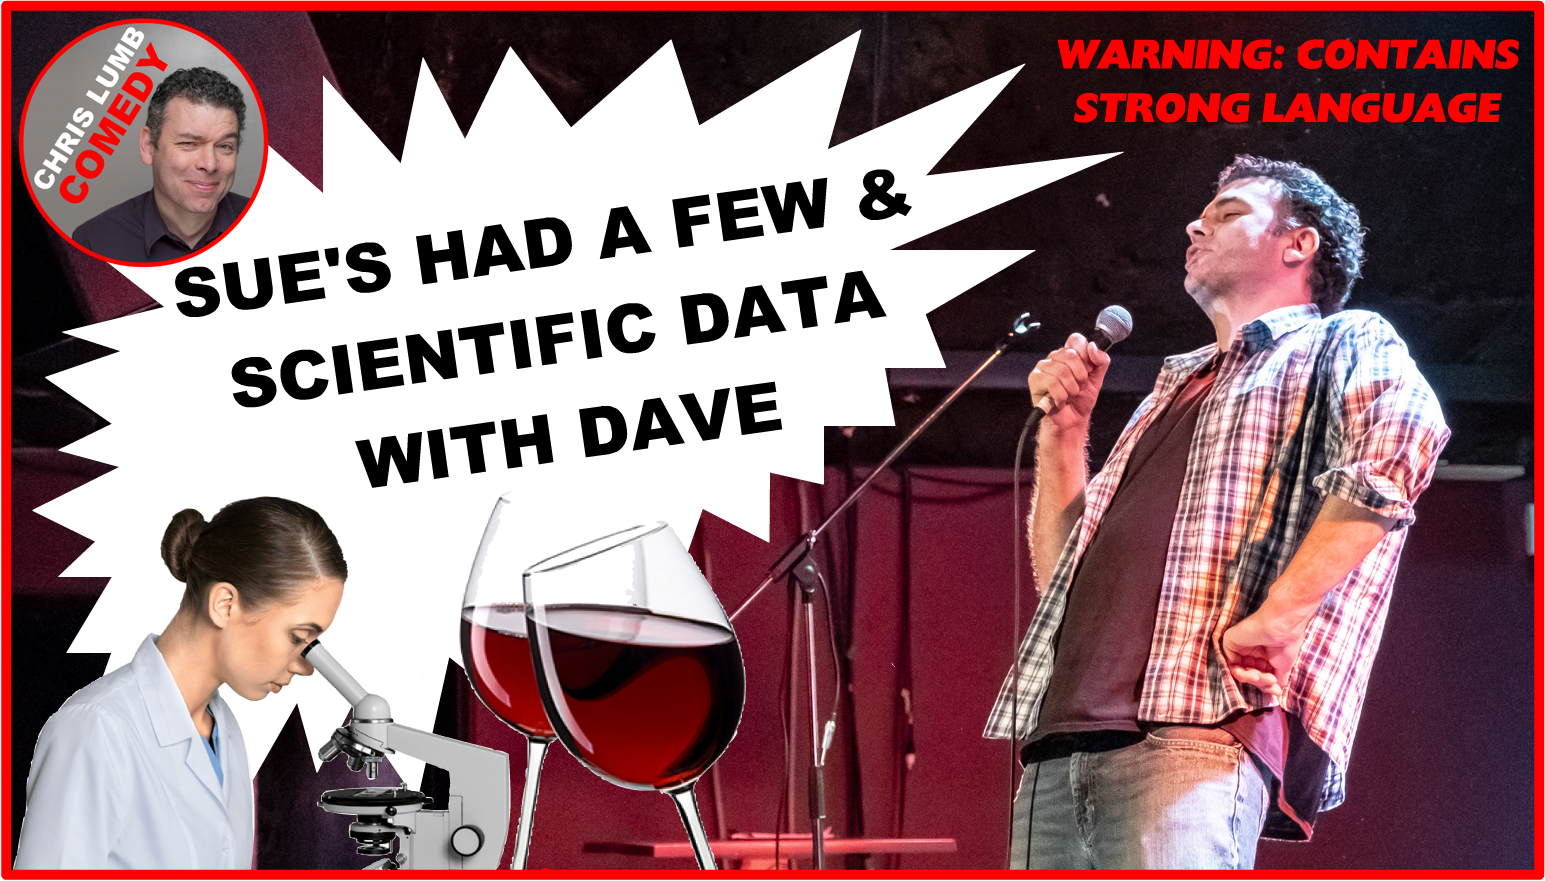 Chris Lumb Comedy "Sue's Had a Few and Scientific Data with Dave"